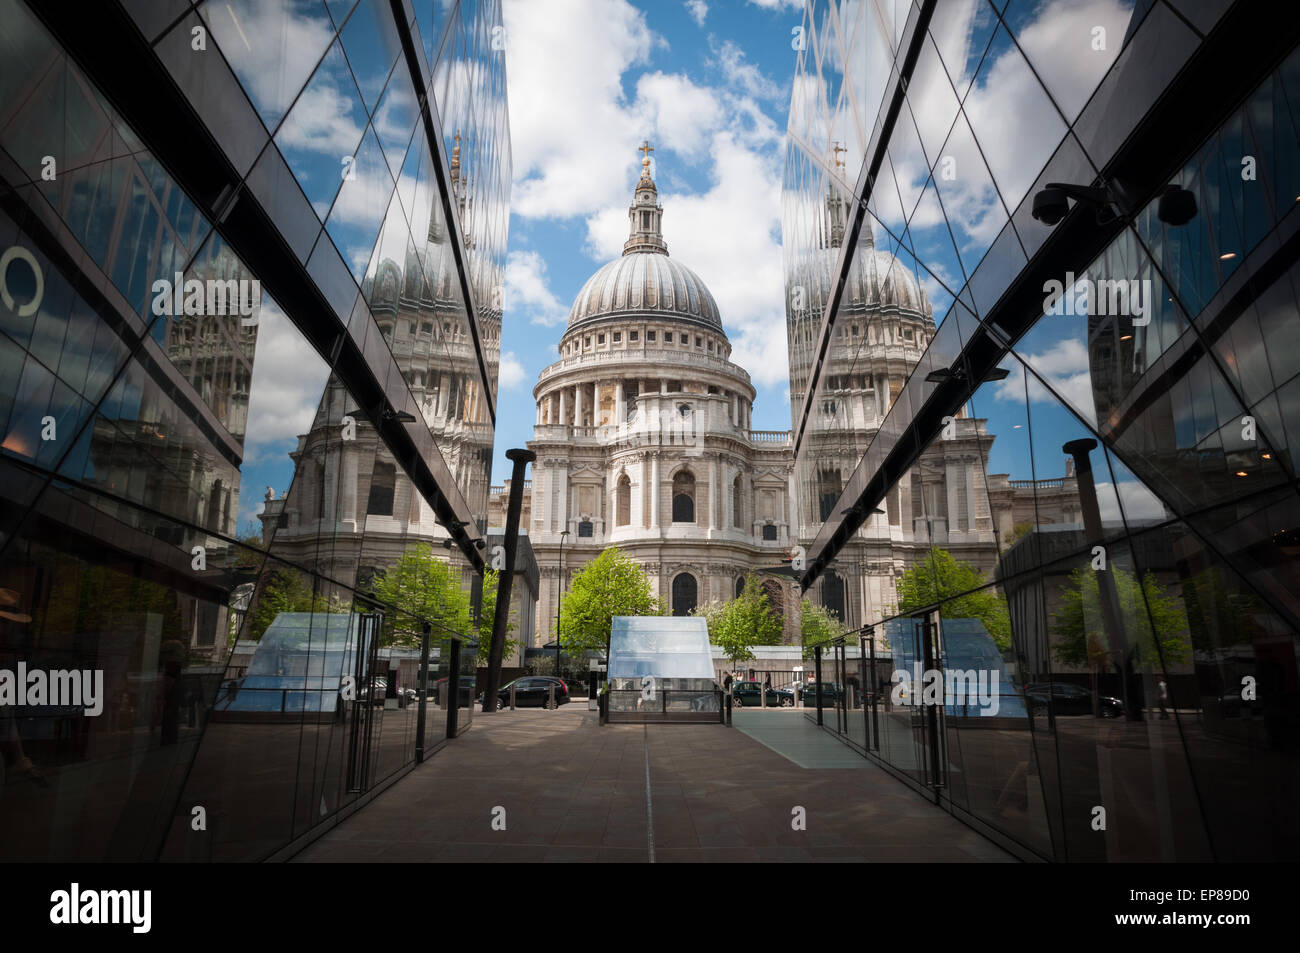 St Paul's Cathedral as seen from One New Change, London, England Stock Photo